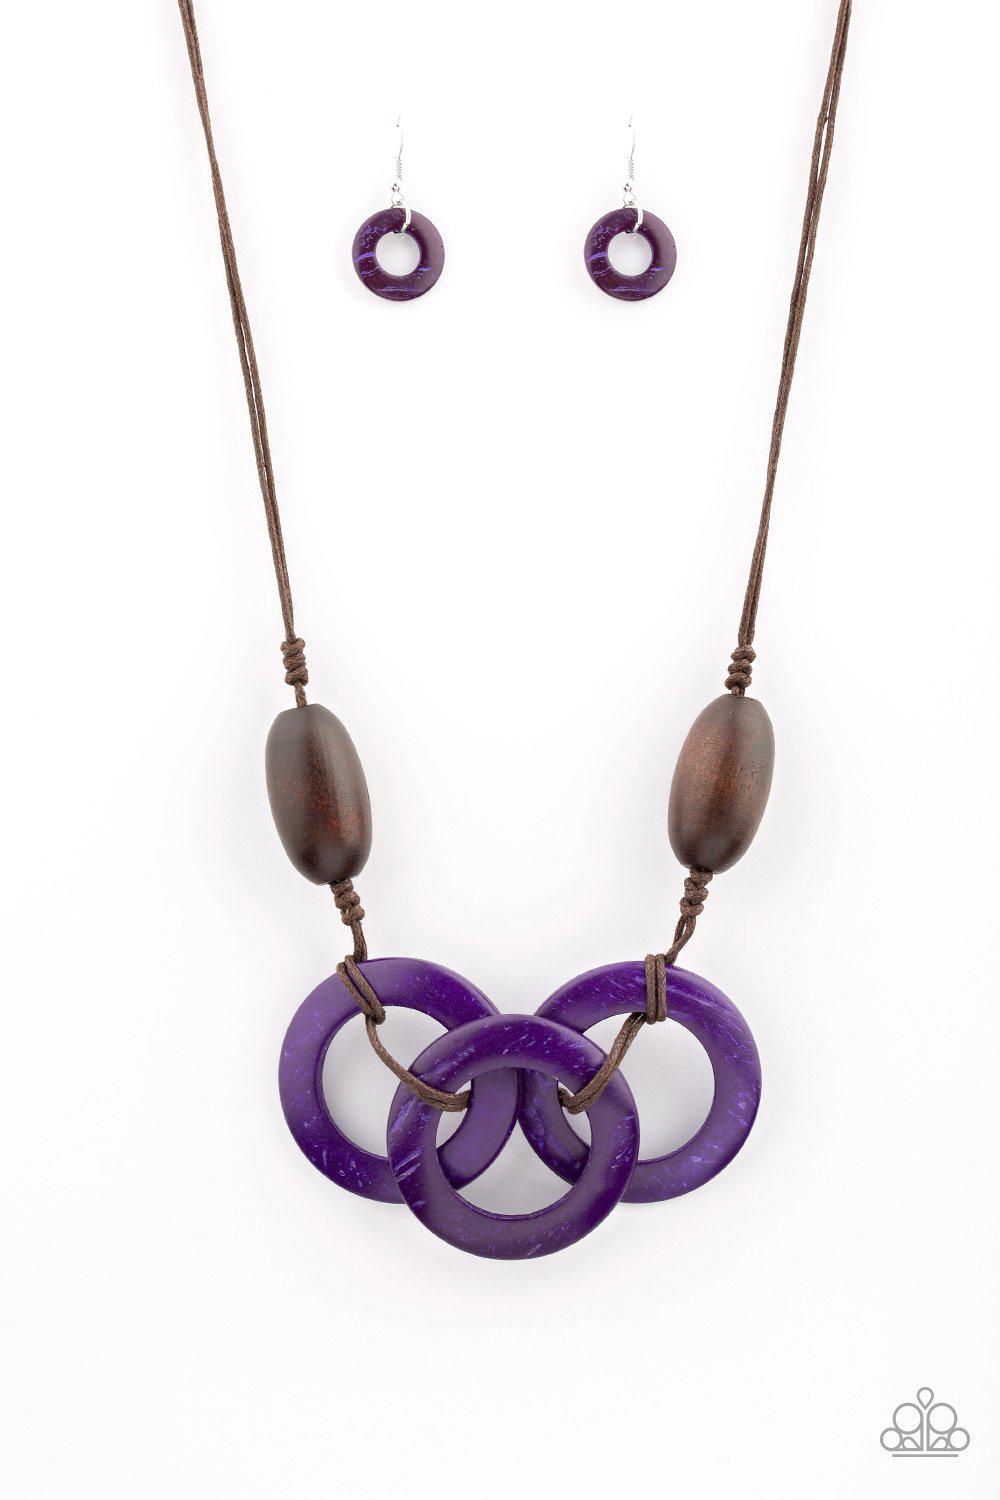 Bahama Drama Purple and Brown Wood Necklace - Paparazzi Accessories-CarasShop.com - $5 Jewelry by Cara Jewels